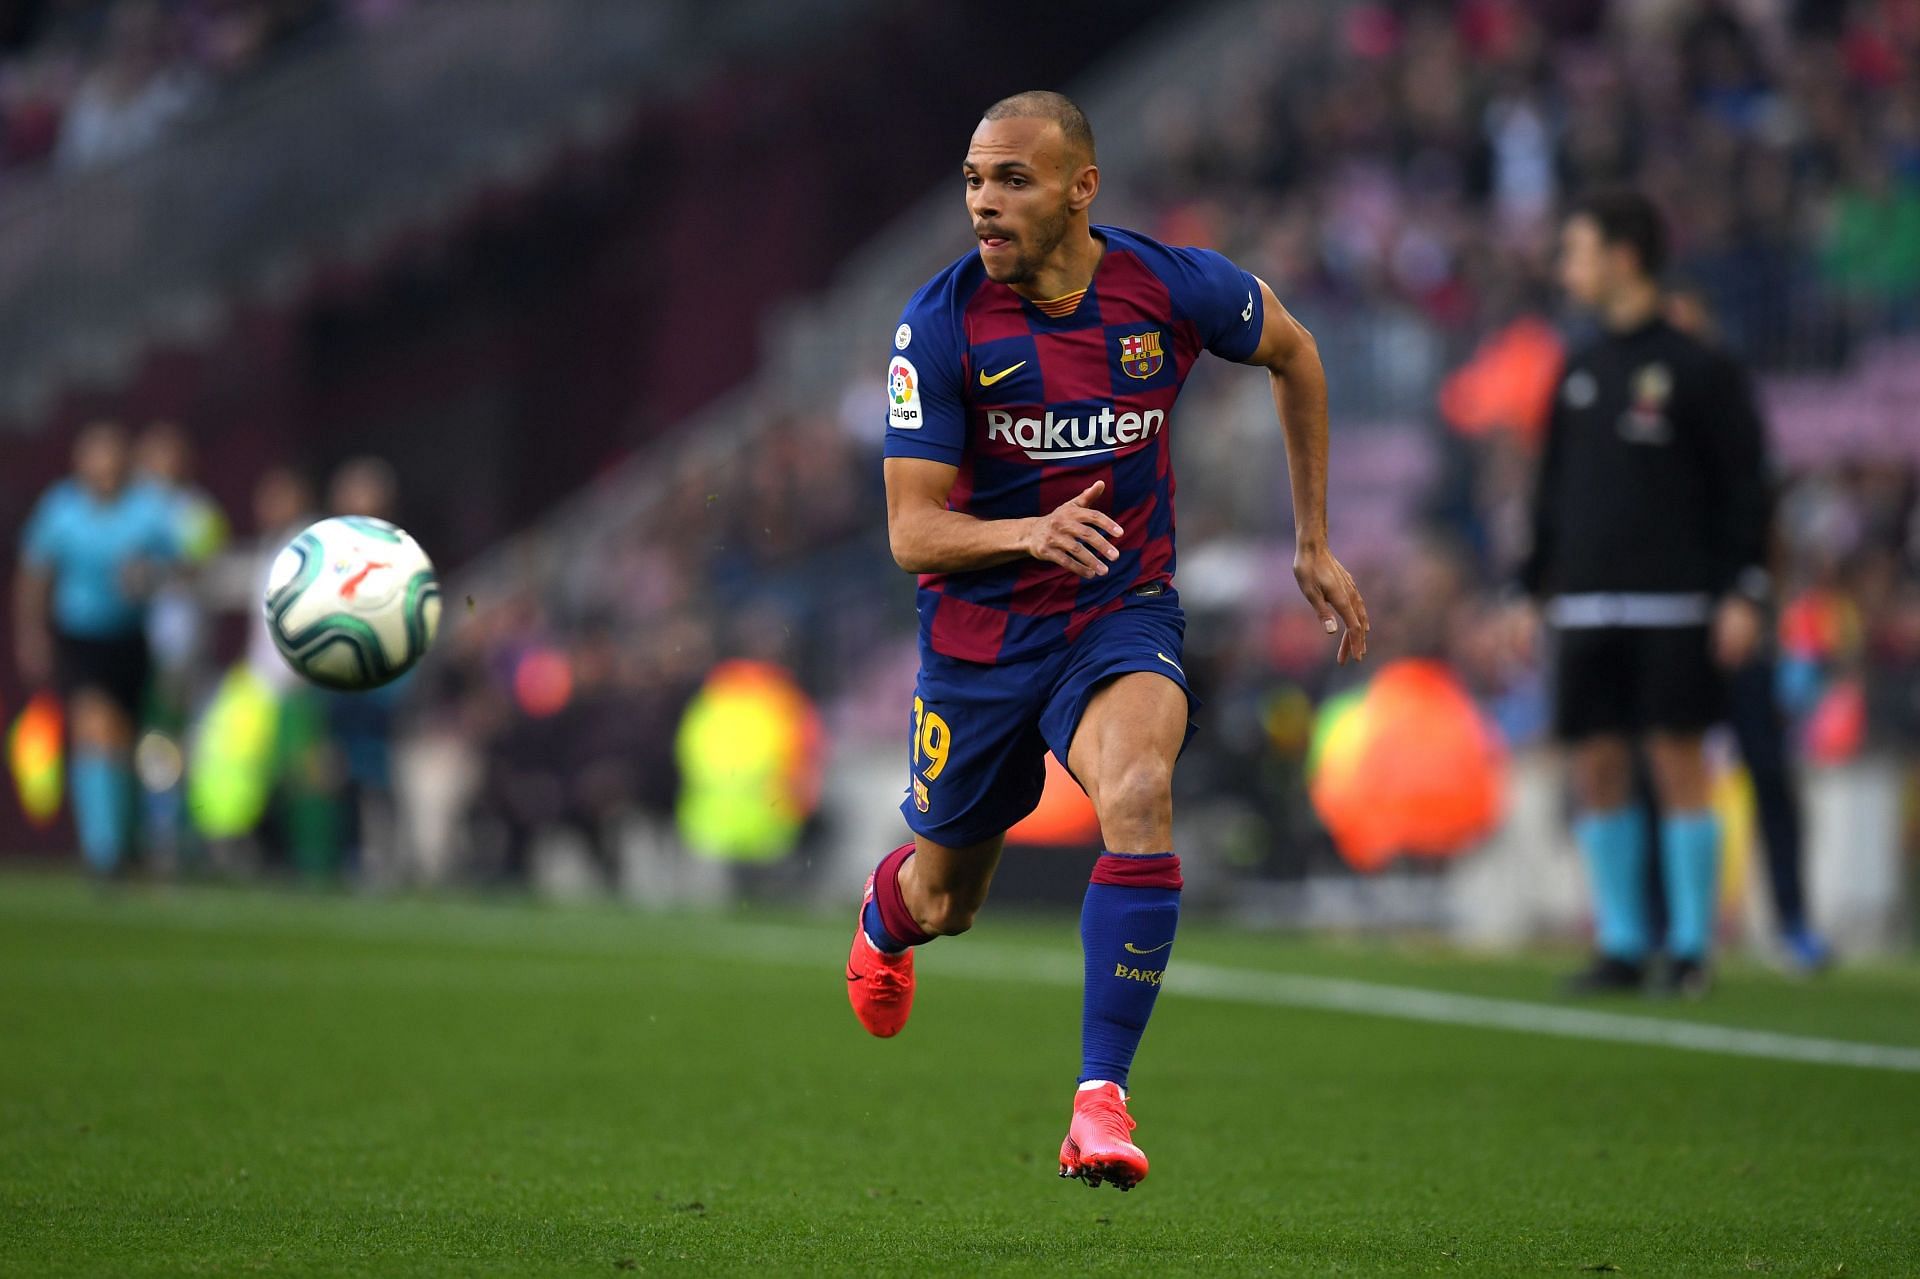 Martin Braithwaite wanted the club to clear the dues to immediately terminate his contract